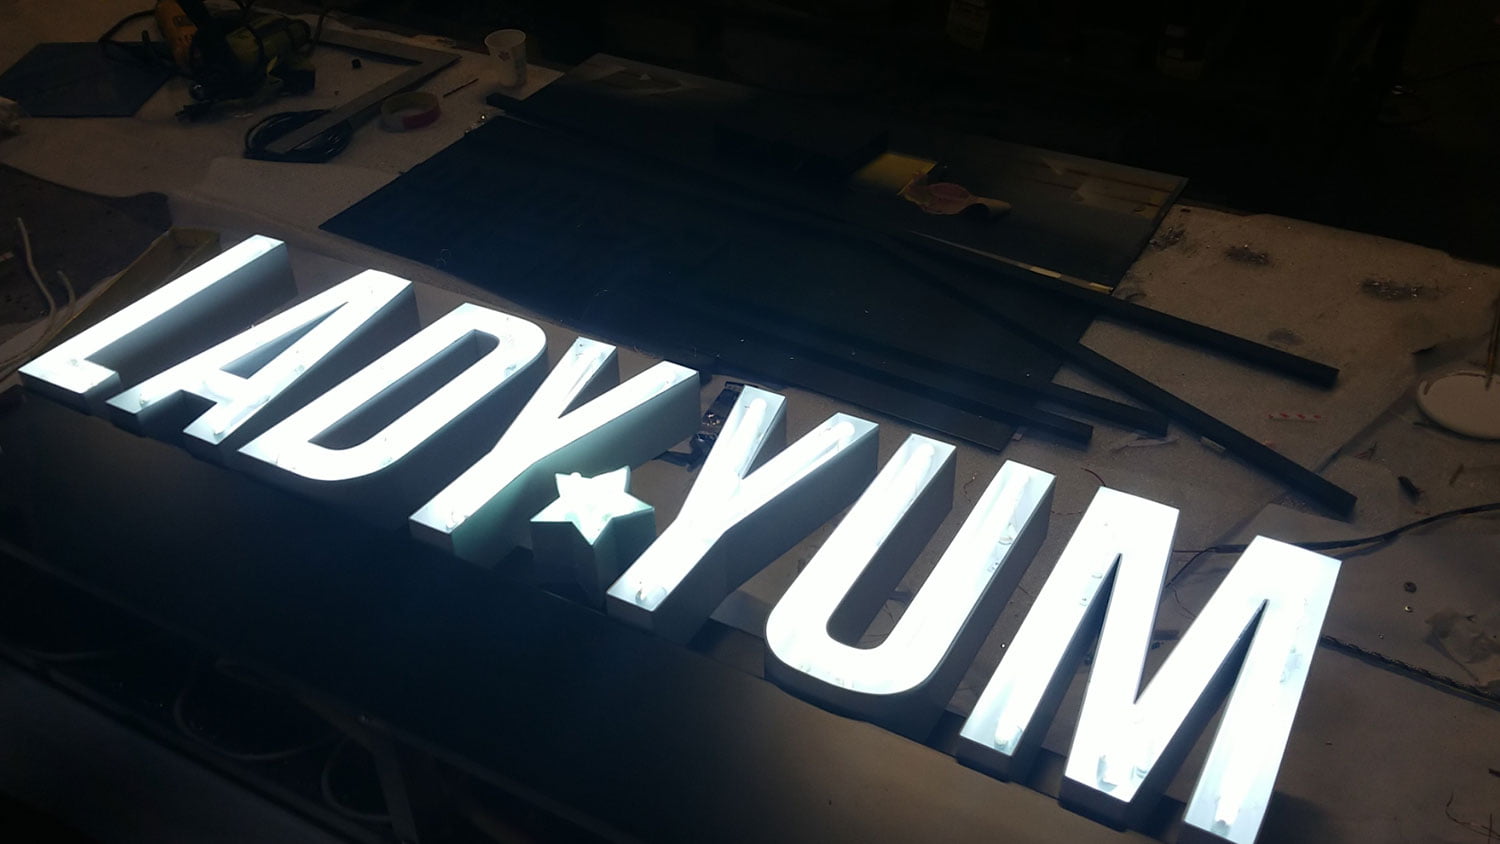 Lady Yum bakery light up channel letter signs in Seatac, Washington